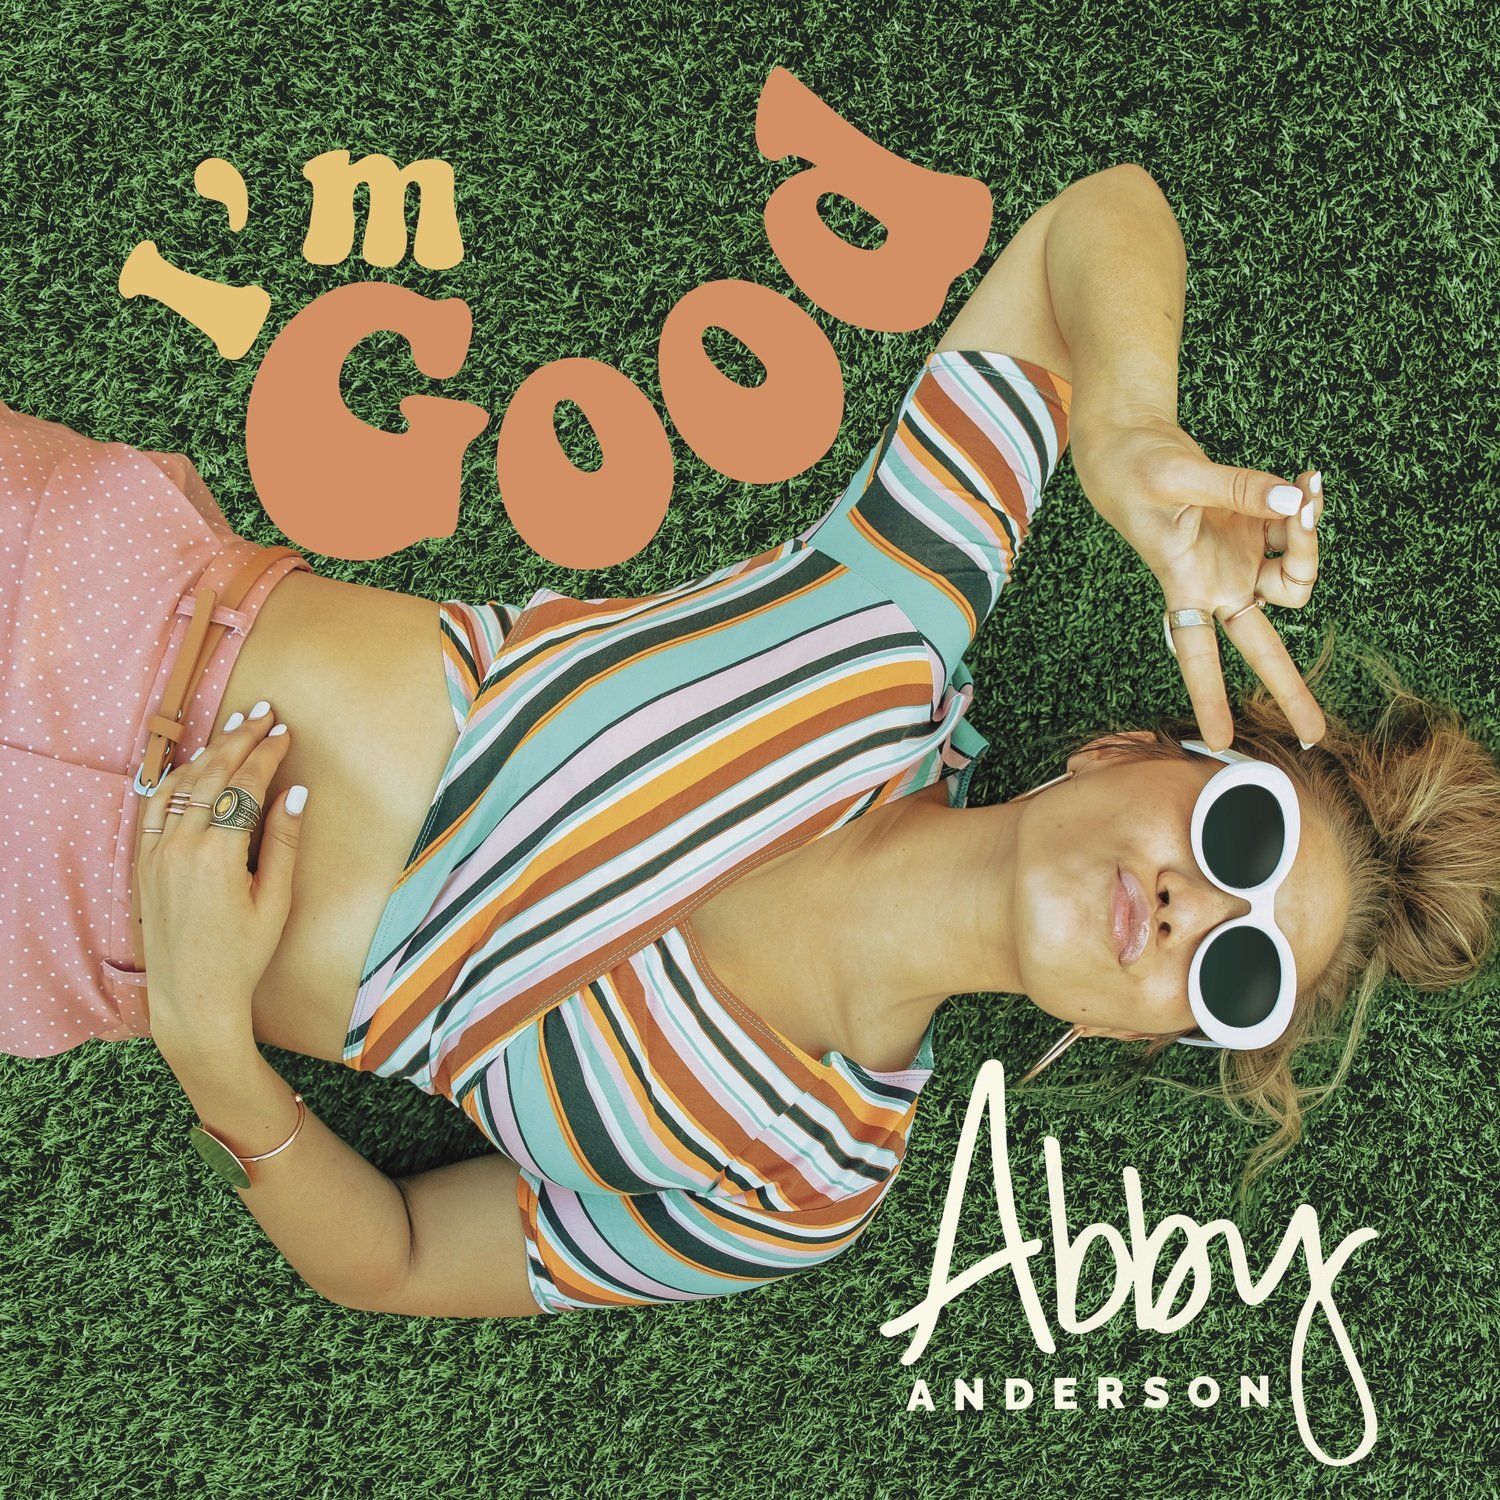 AUTOGRAPHED I'm Good EP - Physical CD